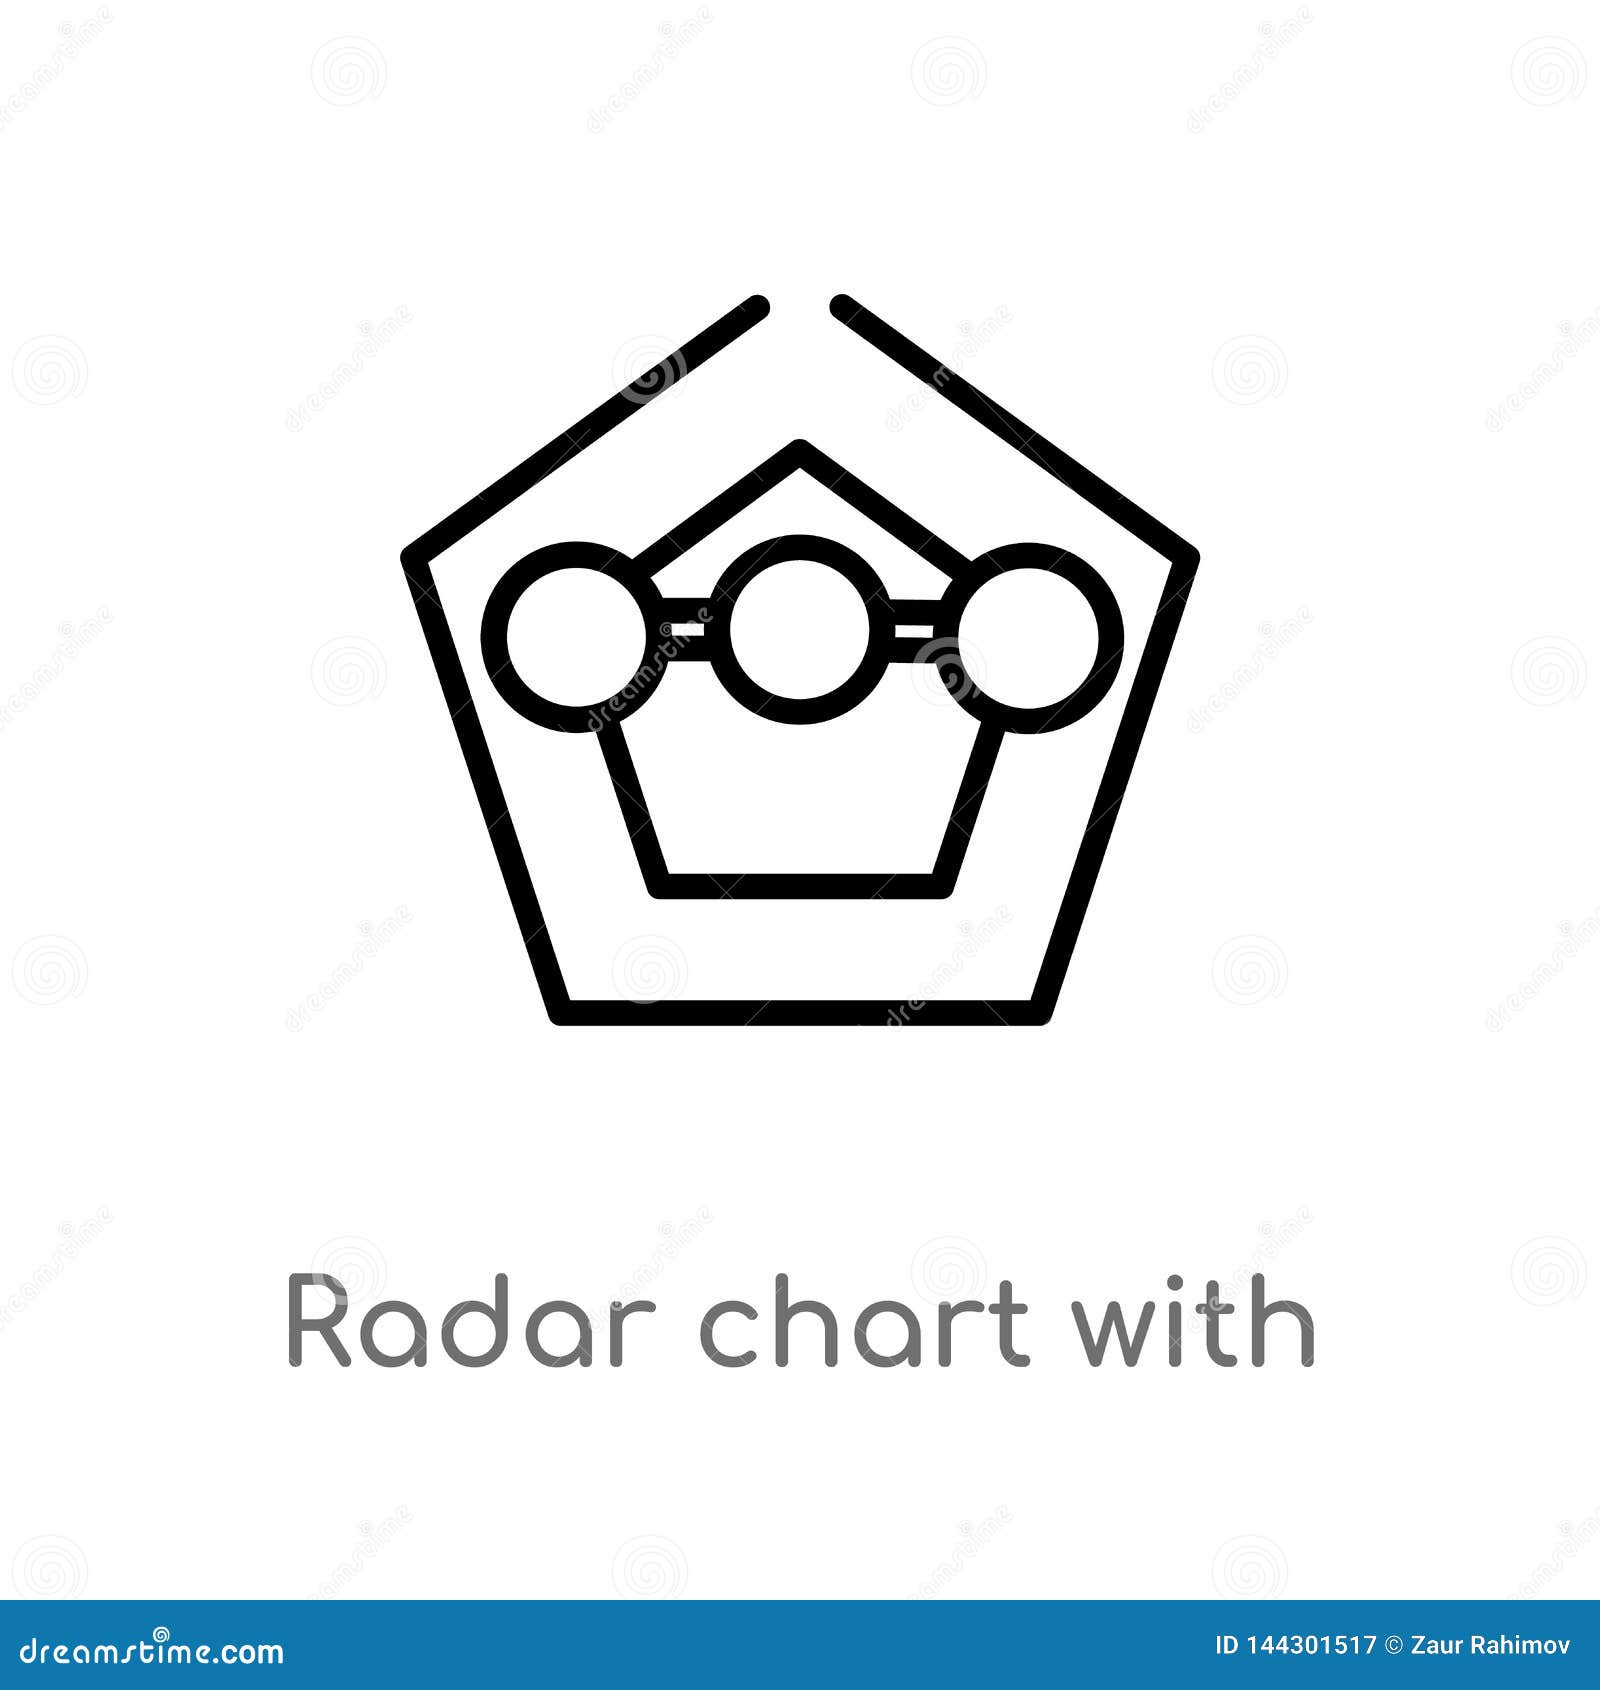 Outline Radar Chart With Pentagon Vector Icon. Isolated Black Simple ...